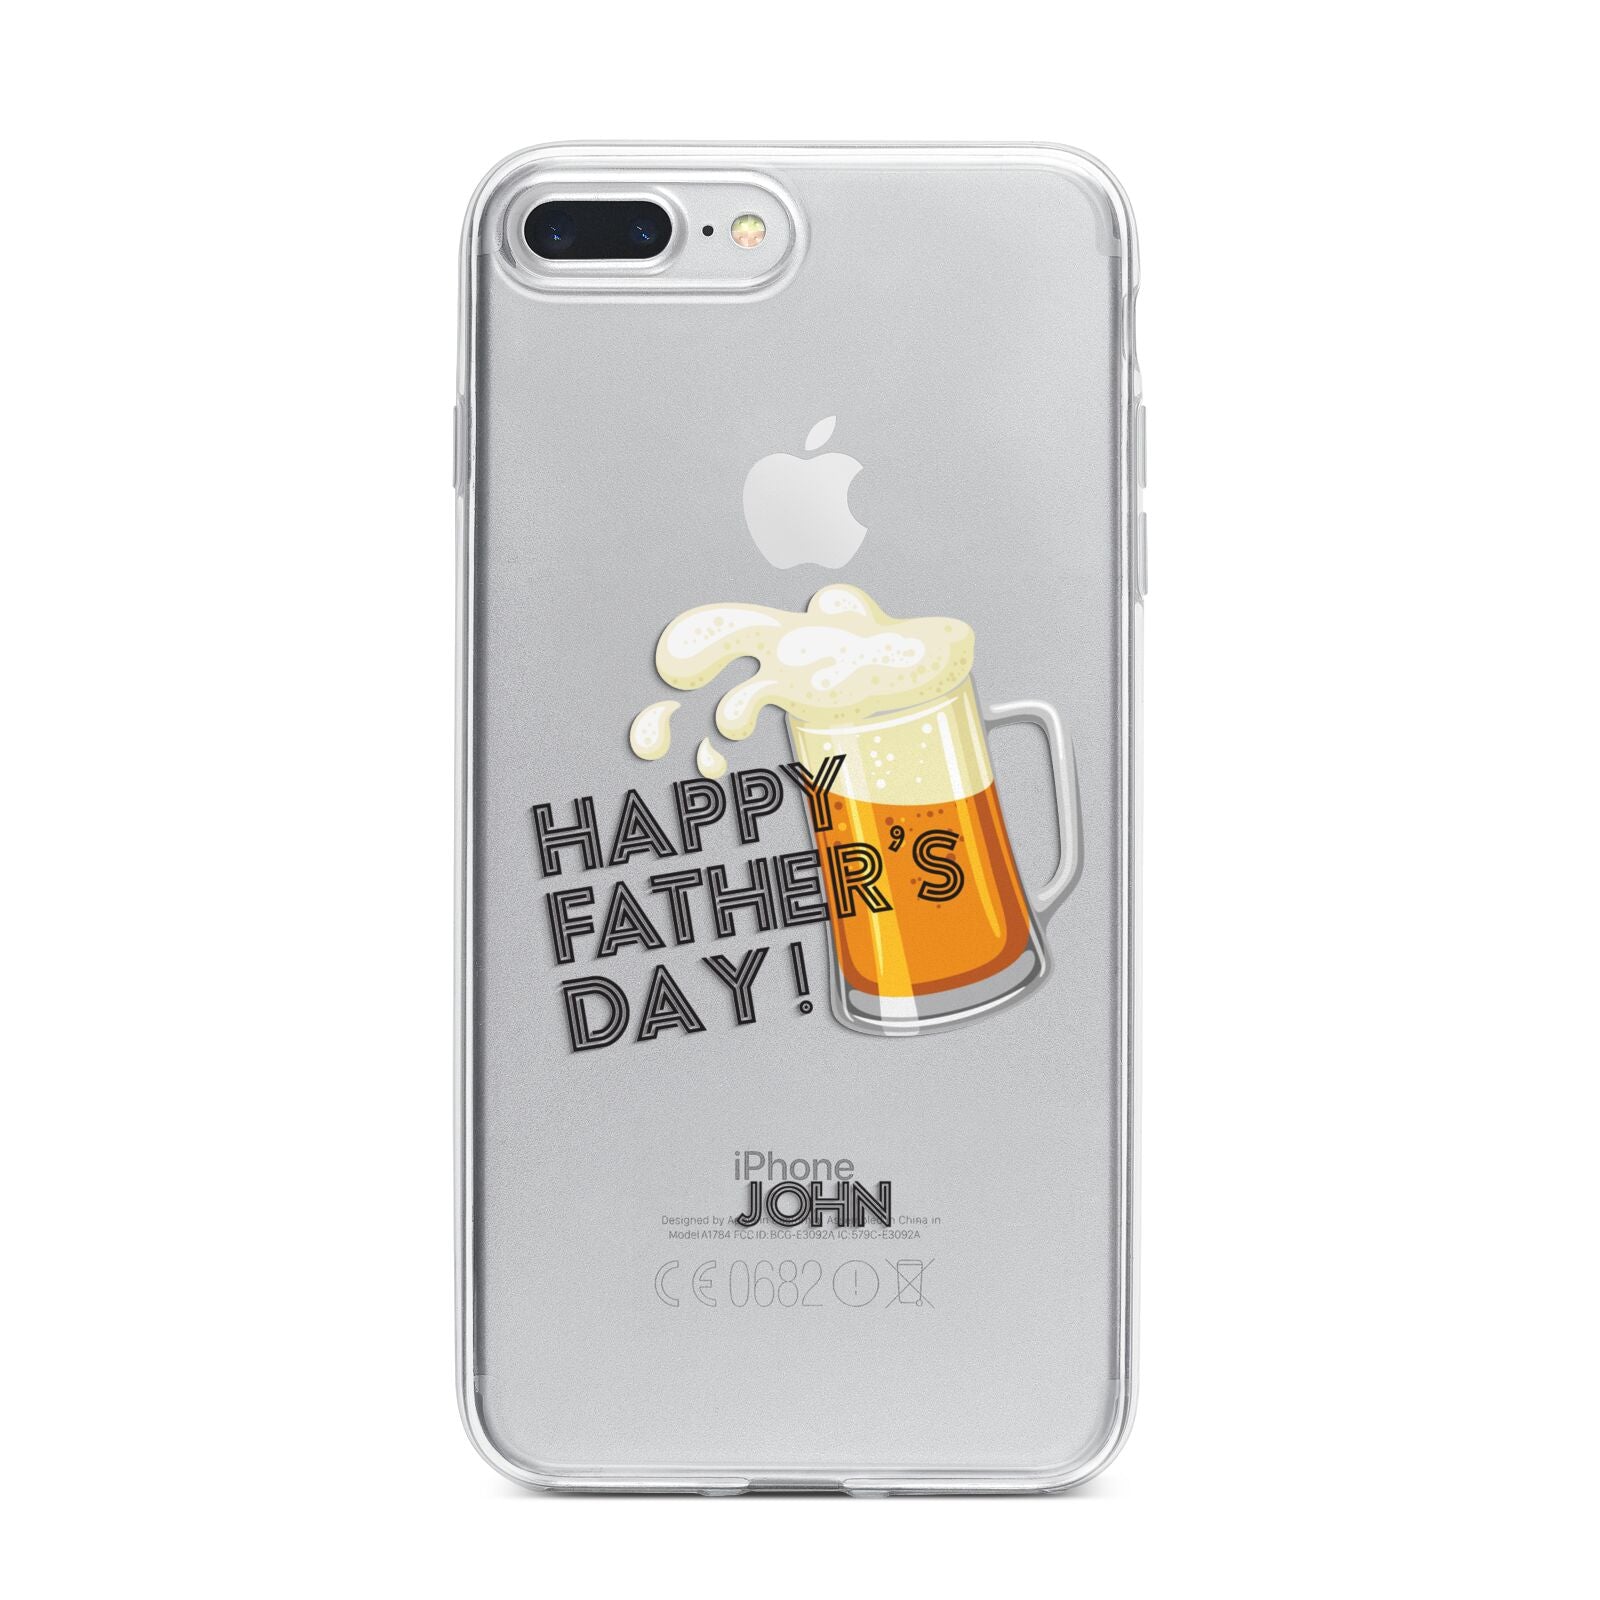 Fathers Day Custom iPhone 7 Plus Bumper Case on Silver iPhone